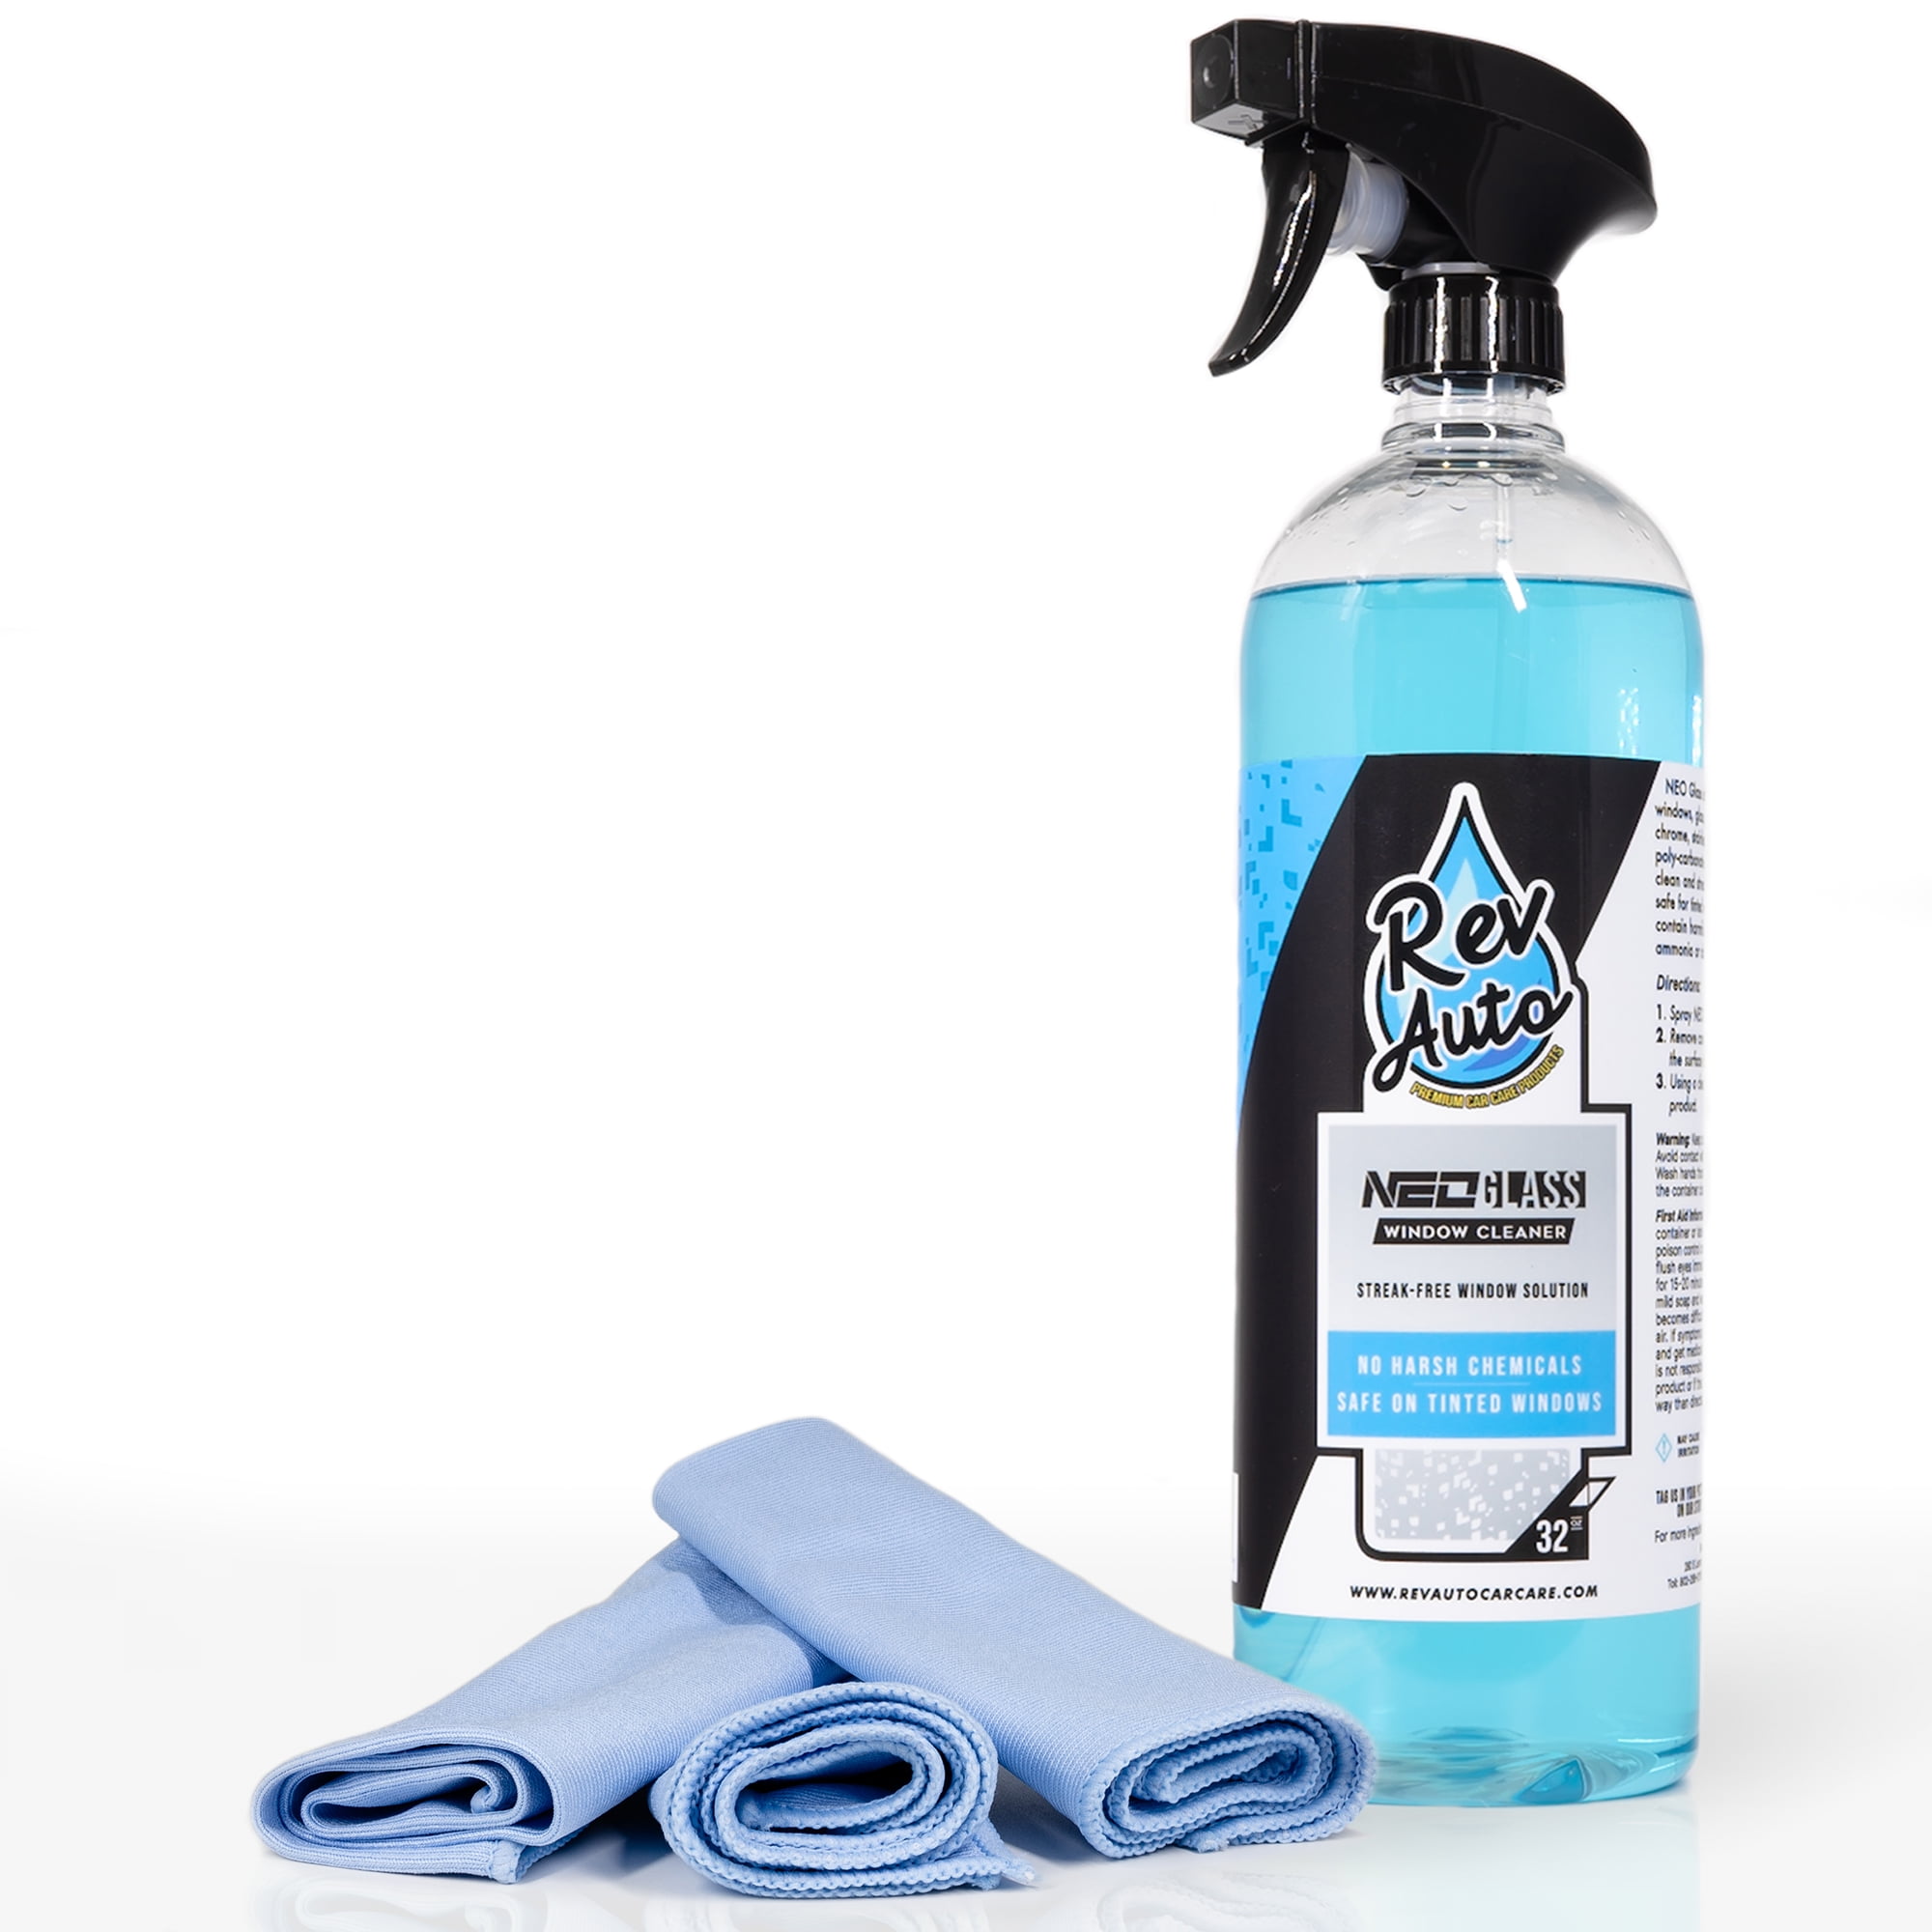 Windshield Cleaner Glass Cleaning Tool - Foldable Auto Window